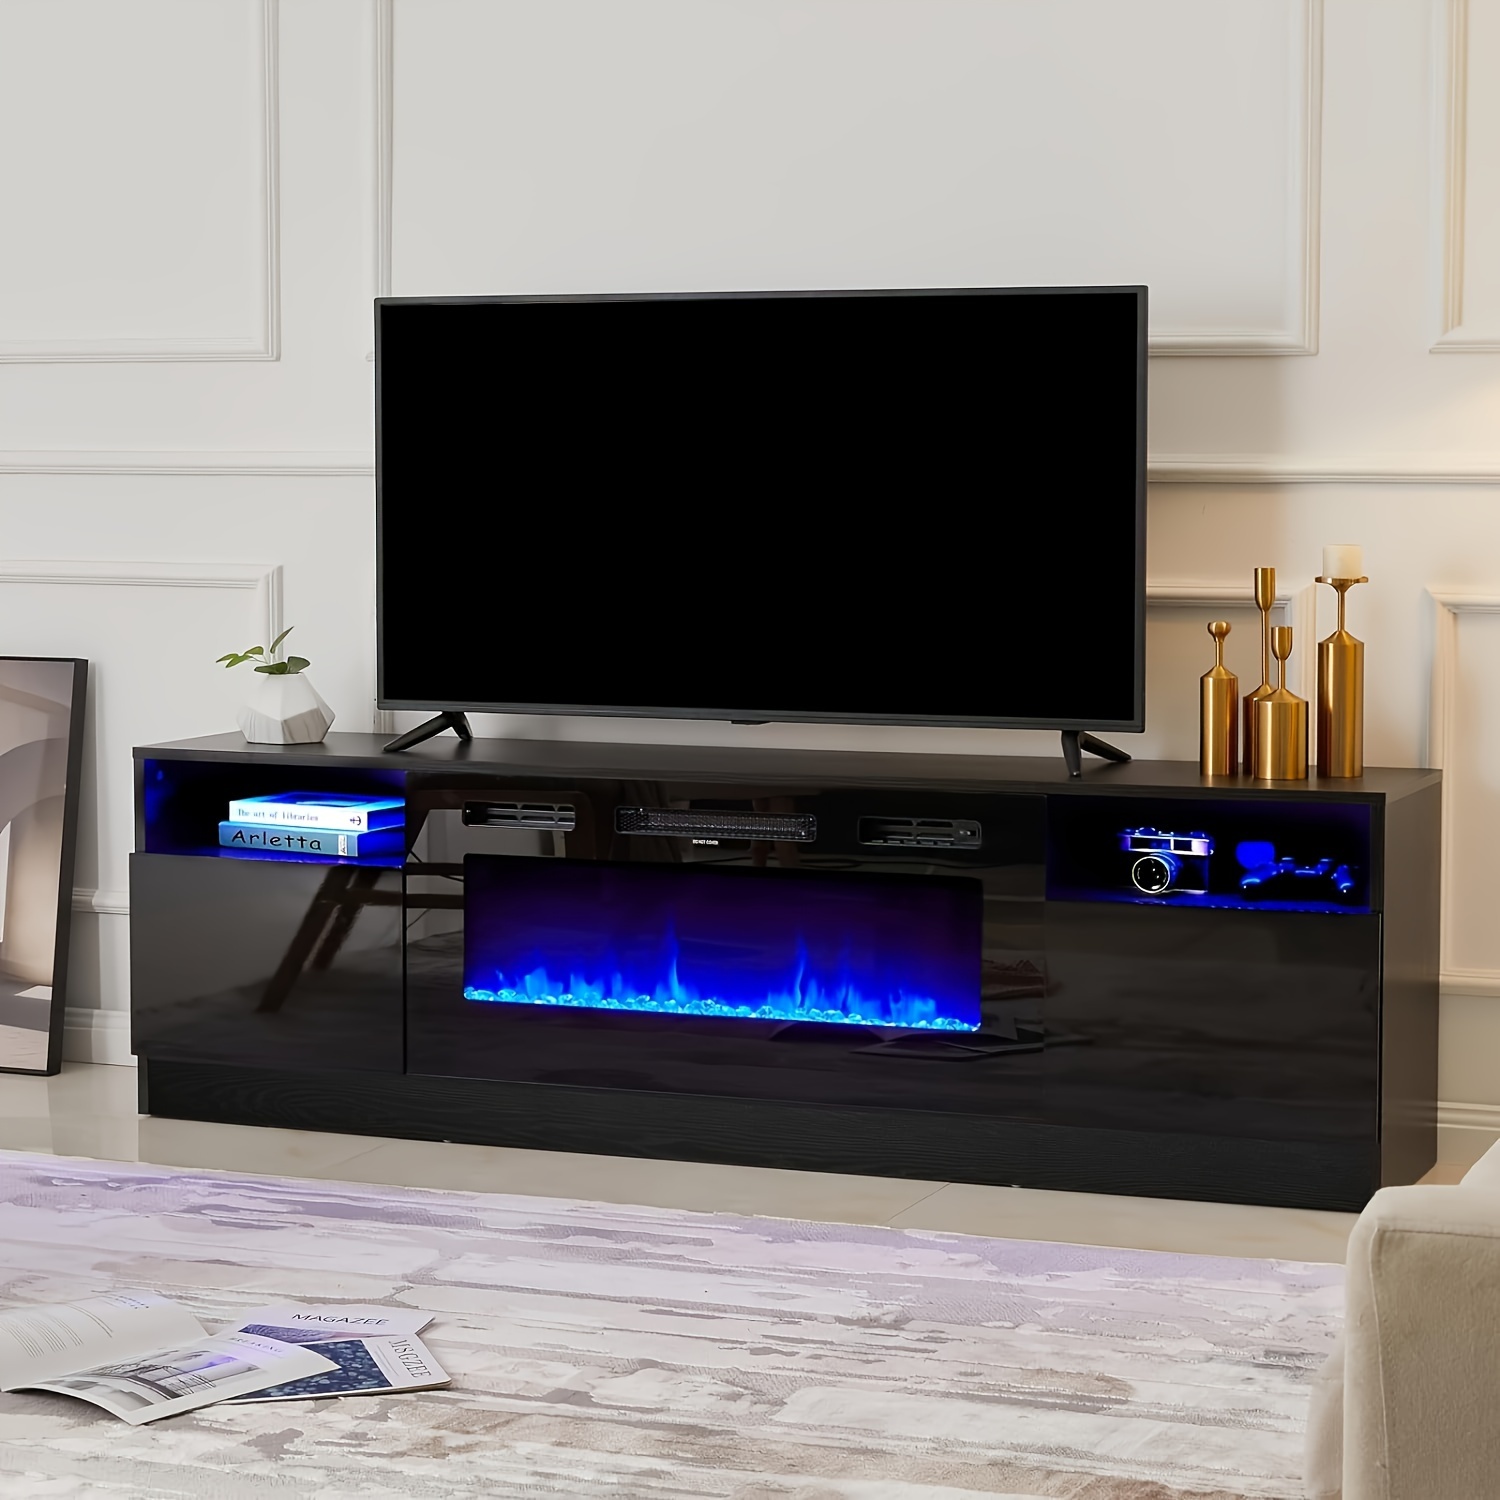 

Black 70 Inches, Contemporary Wood Entertainment Stand With Built-in Electric Fireplace, Led Lighting, And Abundant Storage